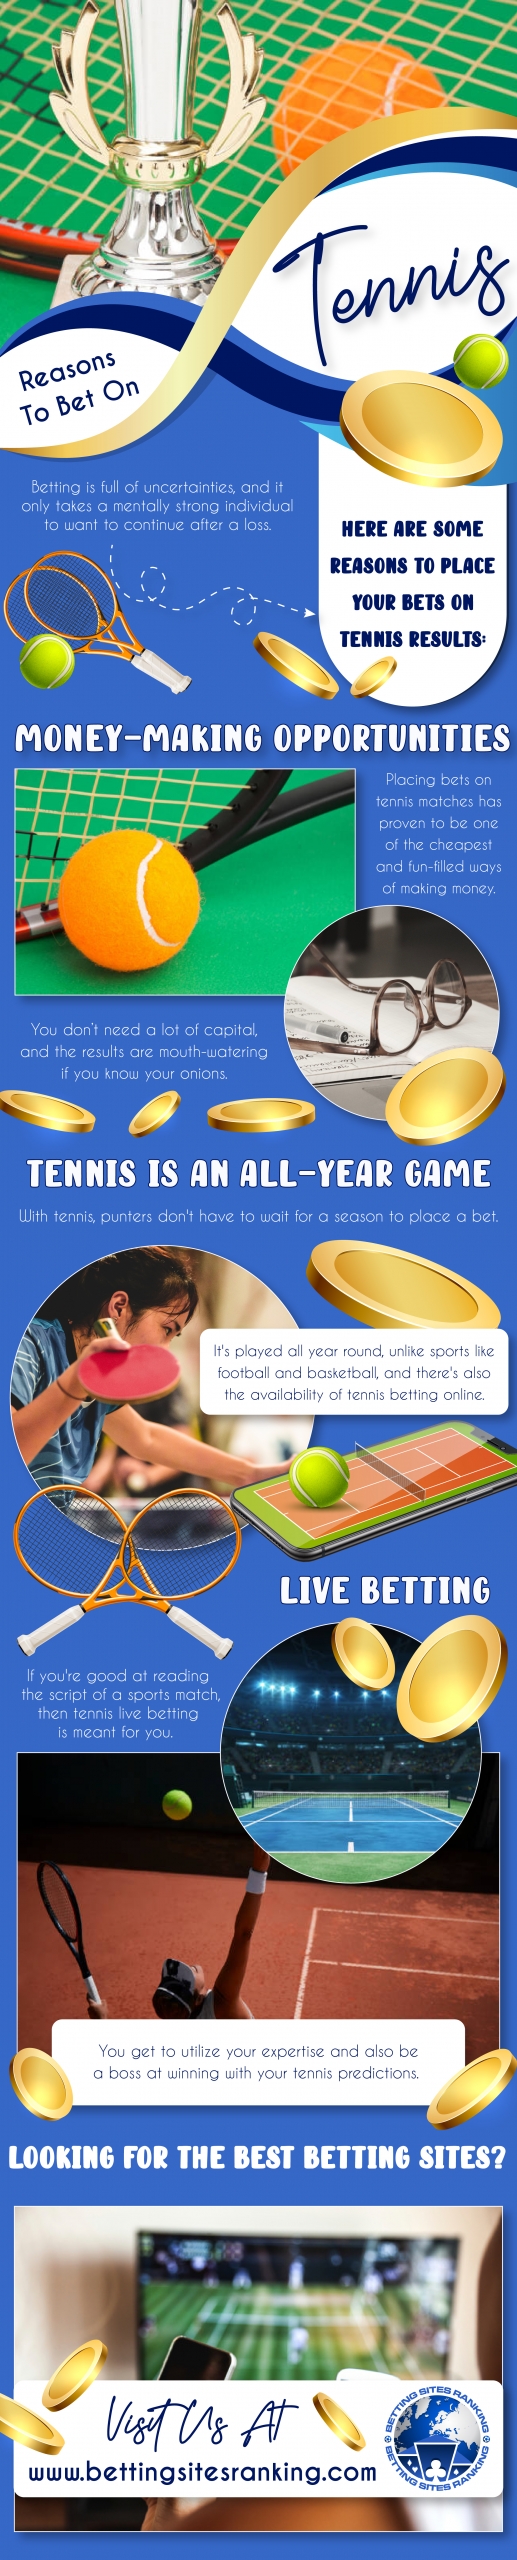 Reasons-To-Bet-On-Tennis